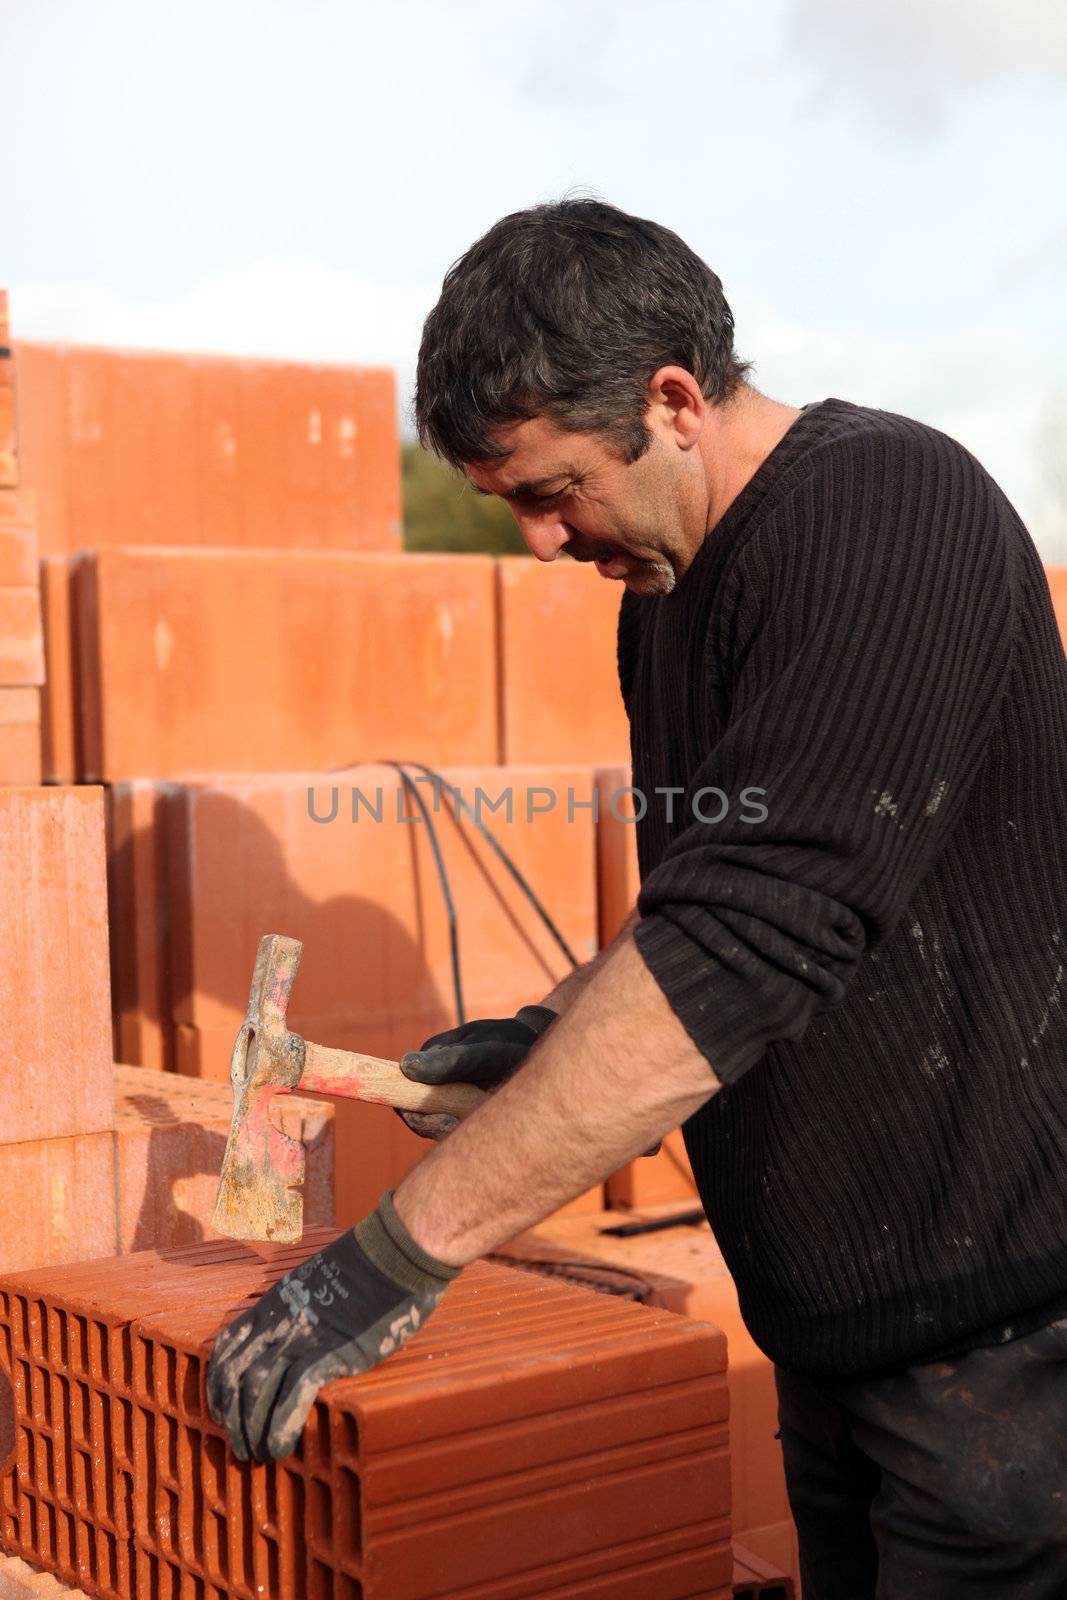 Builder shaping a brick by phovoir